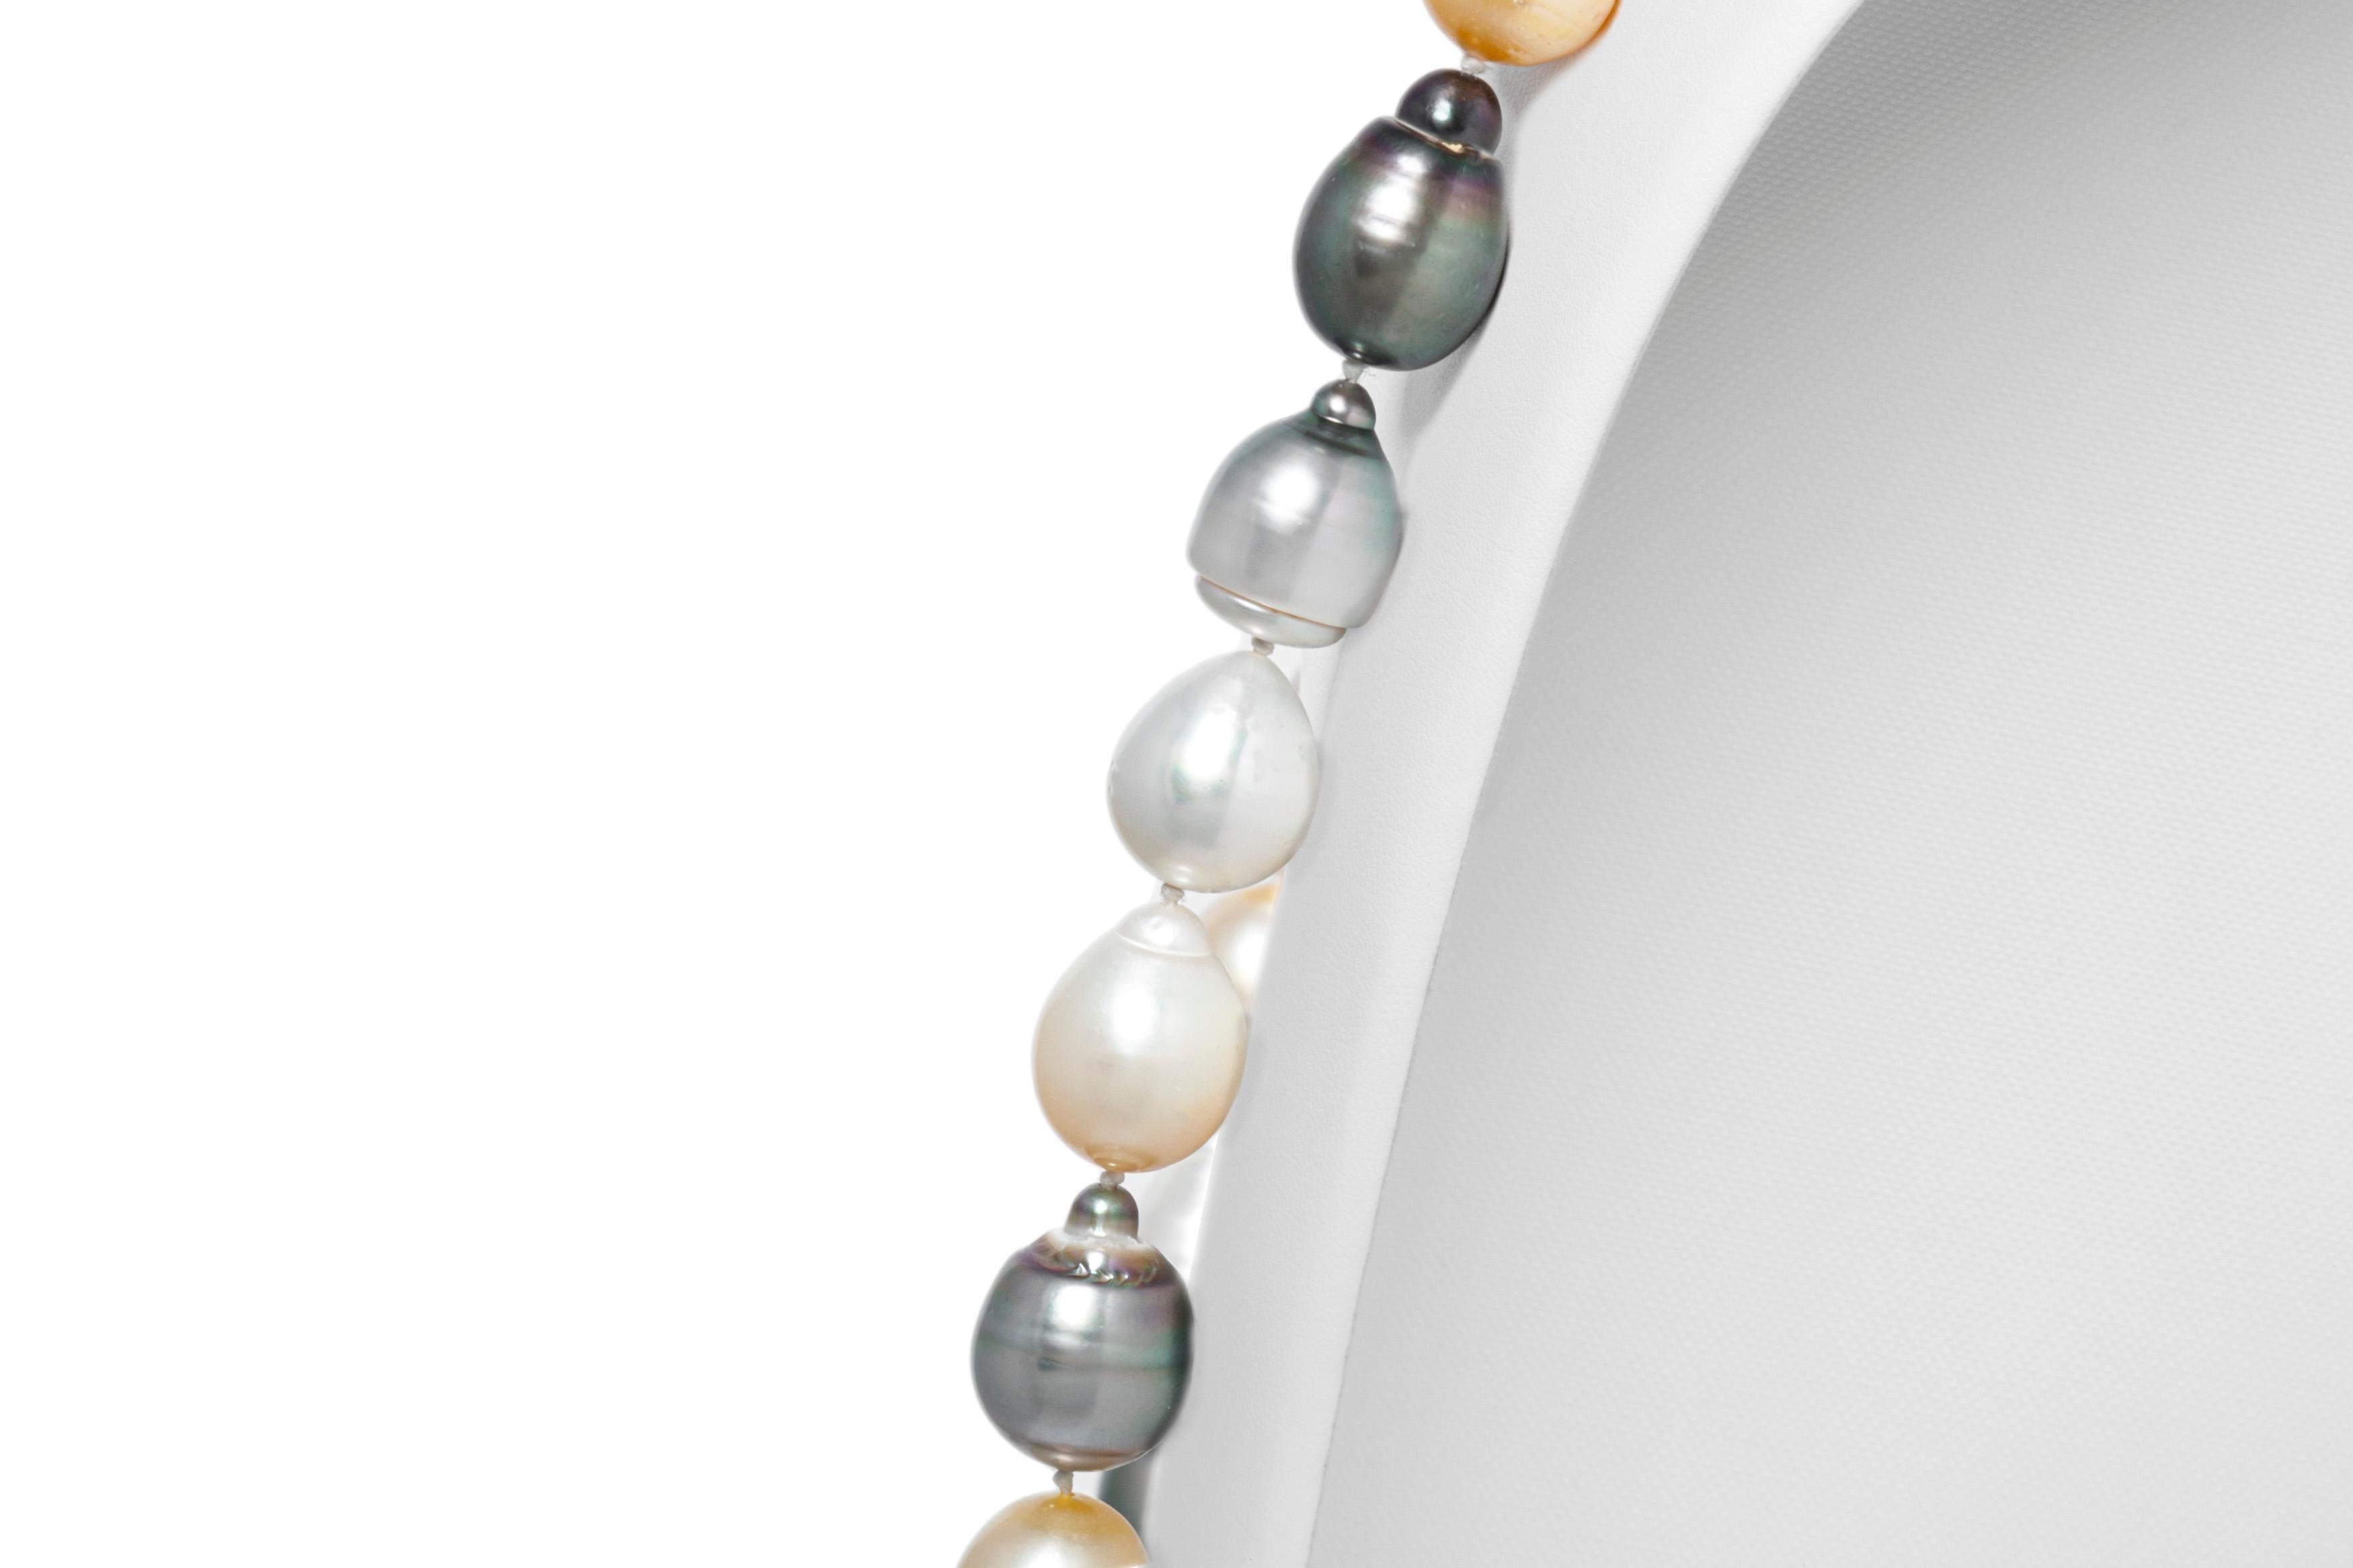 Necklace, finely crafted in 18k and 14k gold with pearls. Size of the pearls is between 13.3 to 17.3 mm.